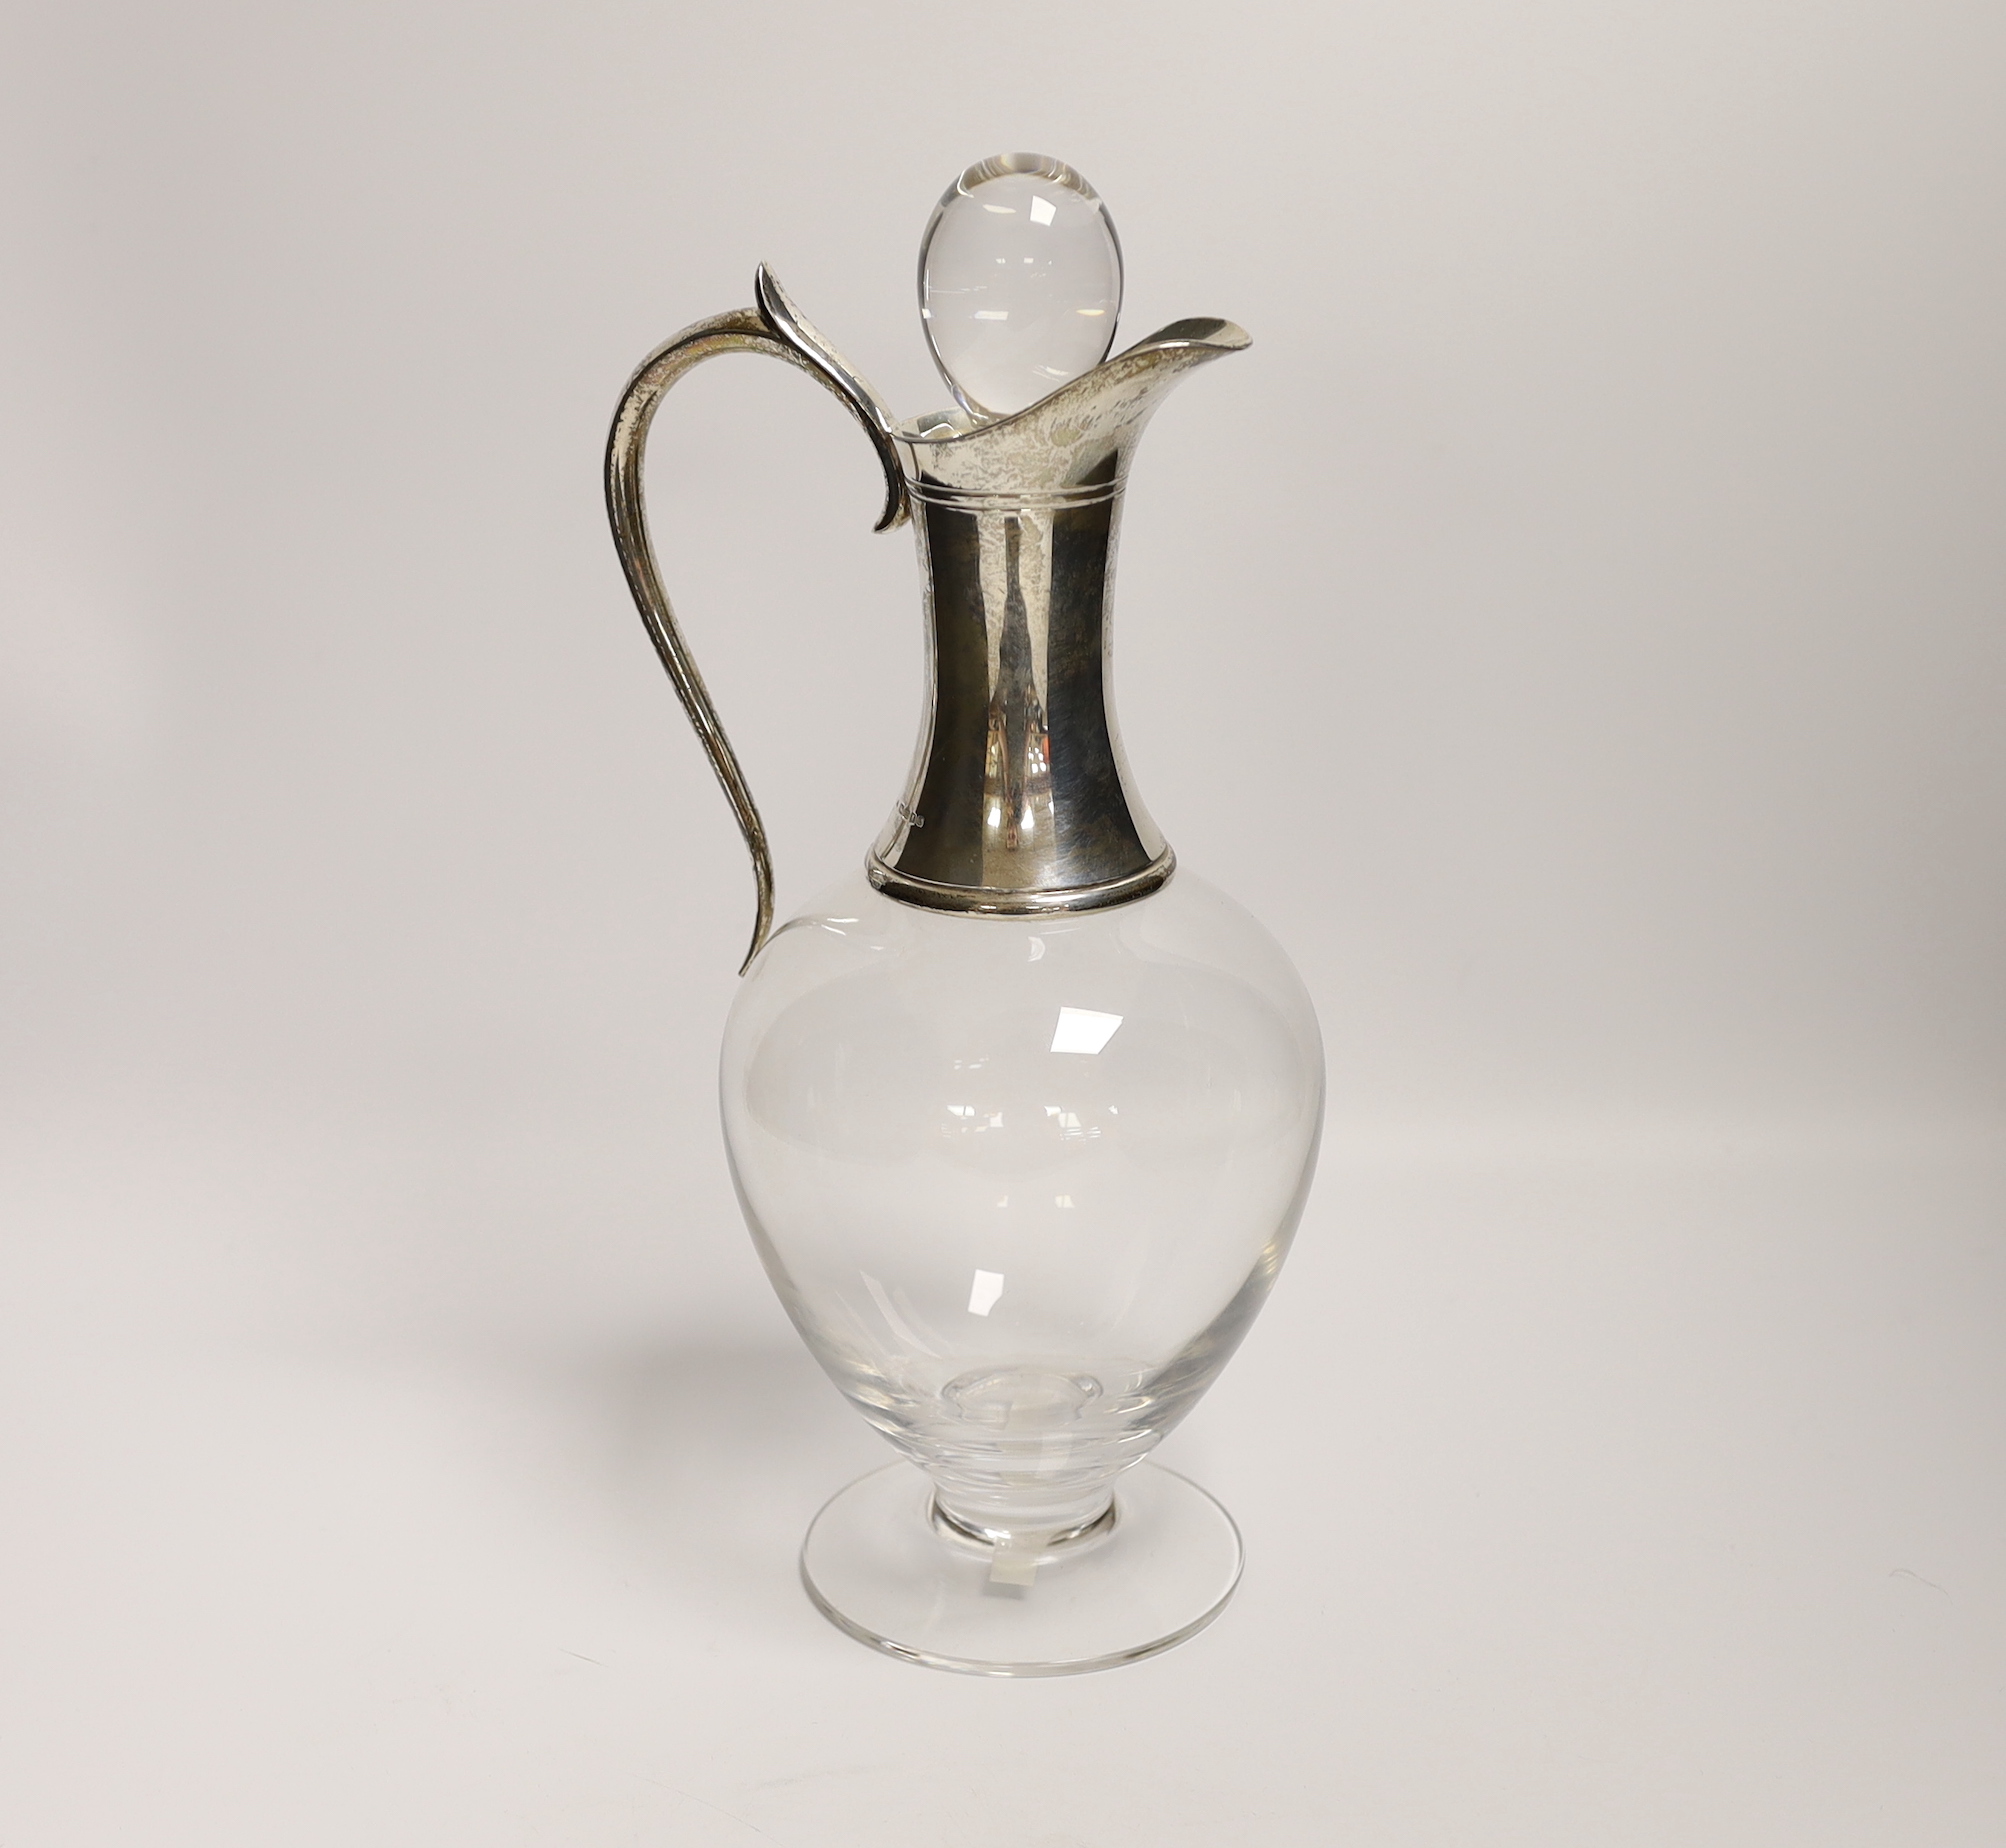 An Elizabeth II silver mounted glass claret jug and stopper, by J.A. Campbell, 2004, height 28.2 excl. stopper, in original fitted box.